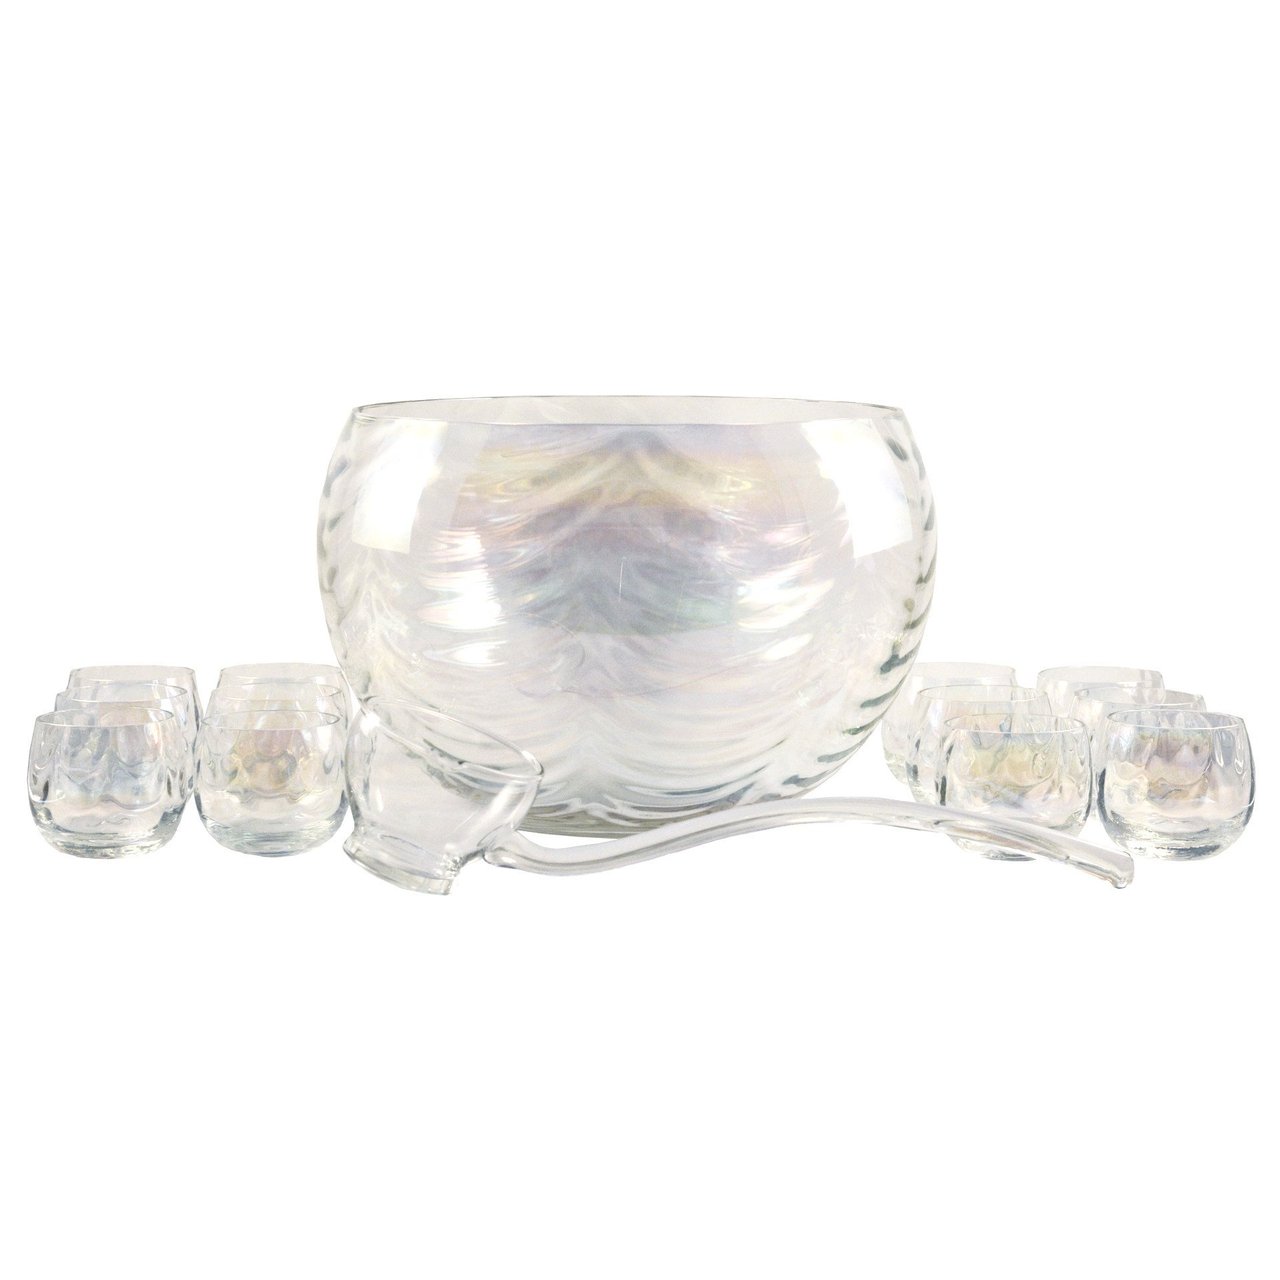 Glass punch bowl and ladle set